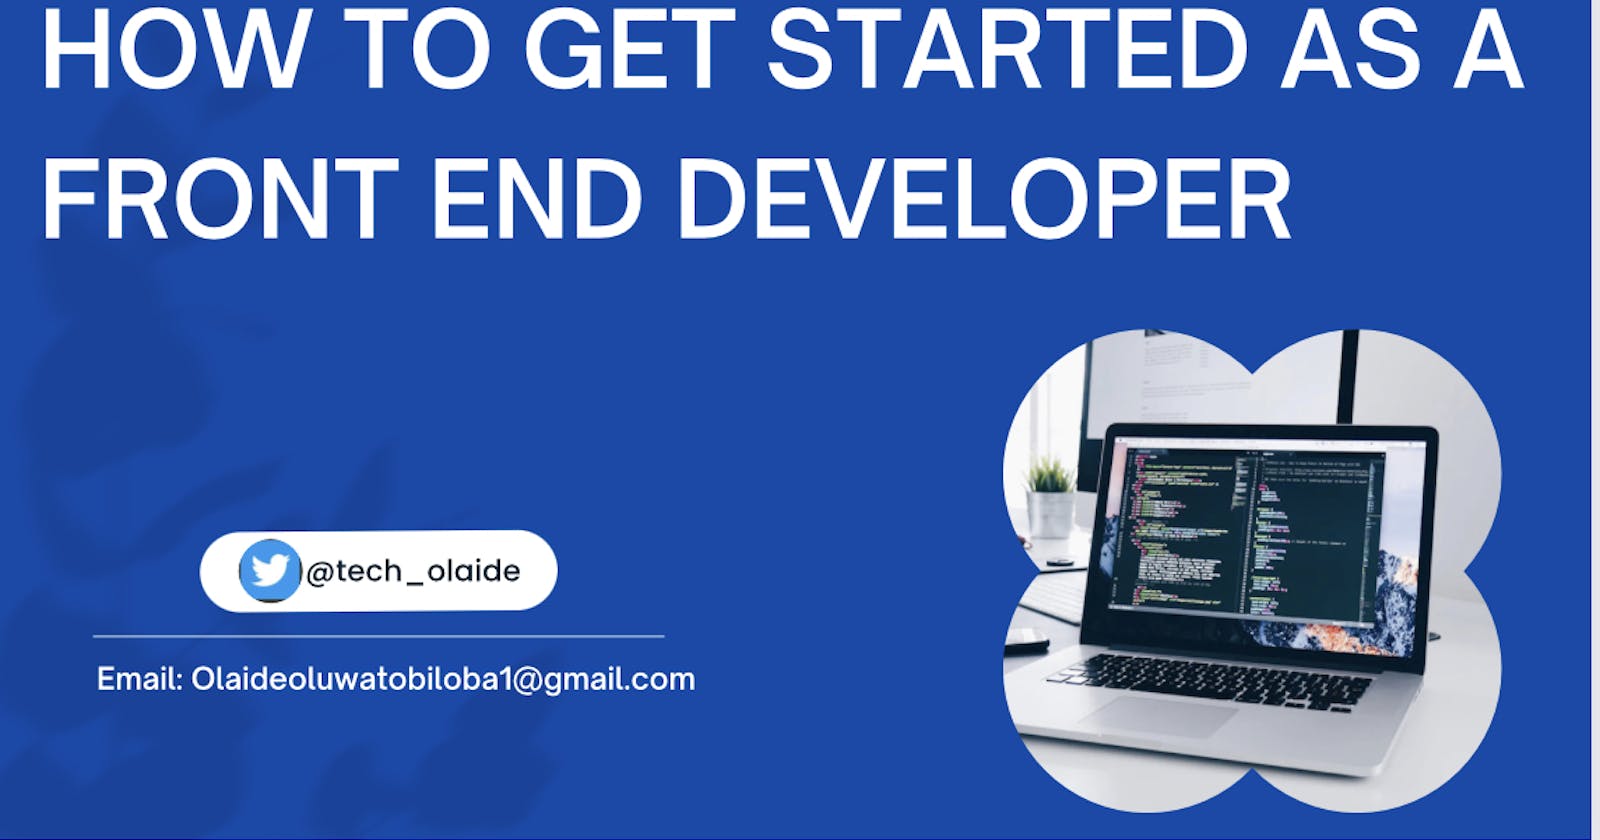 How To Get Started As A Front End Web Developer